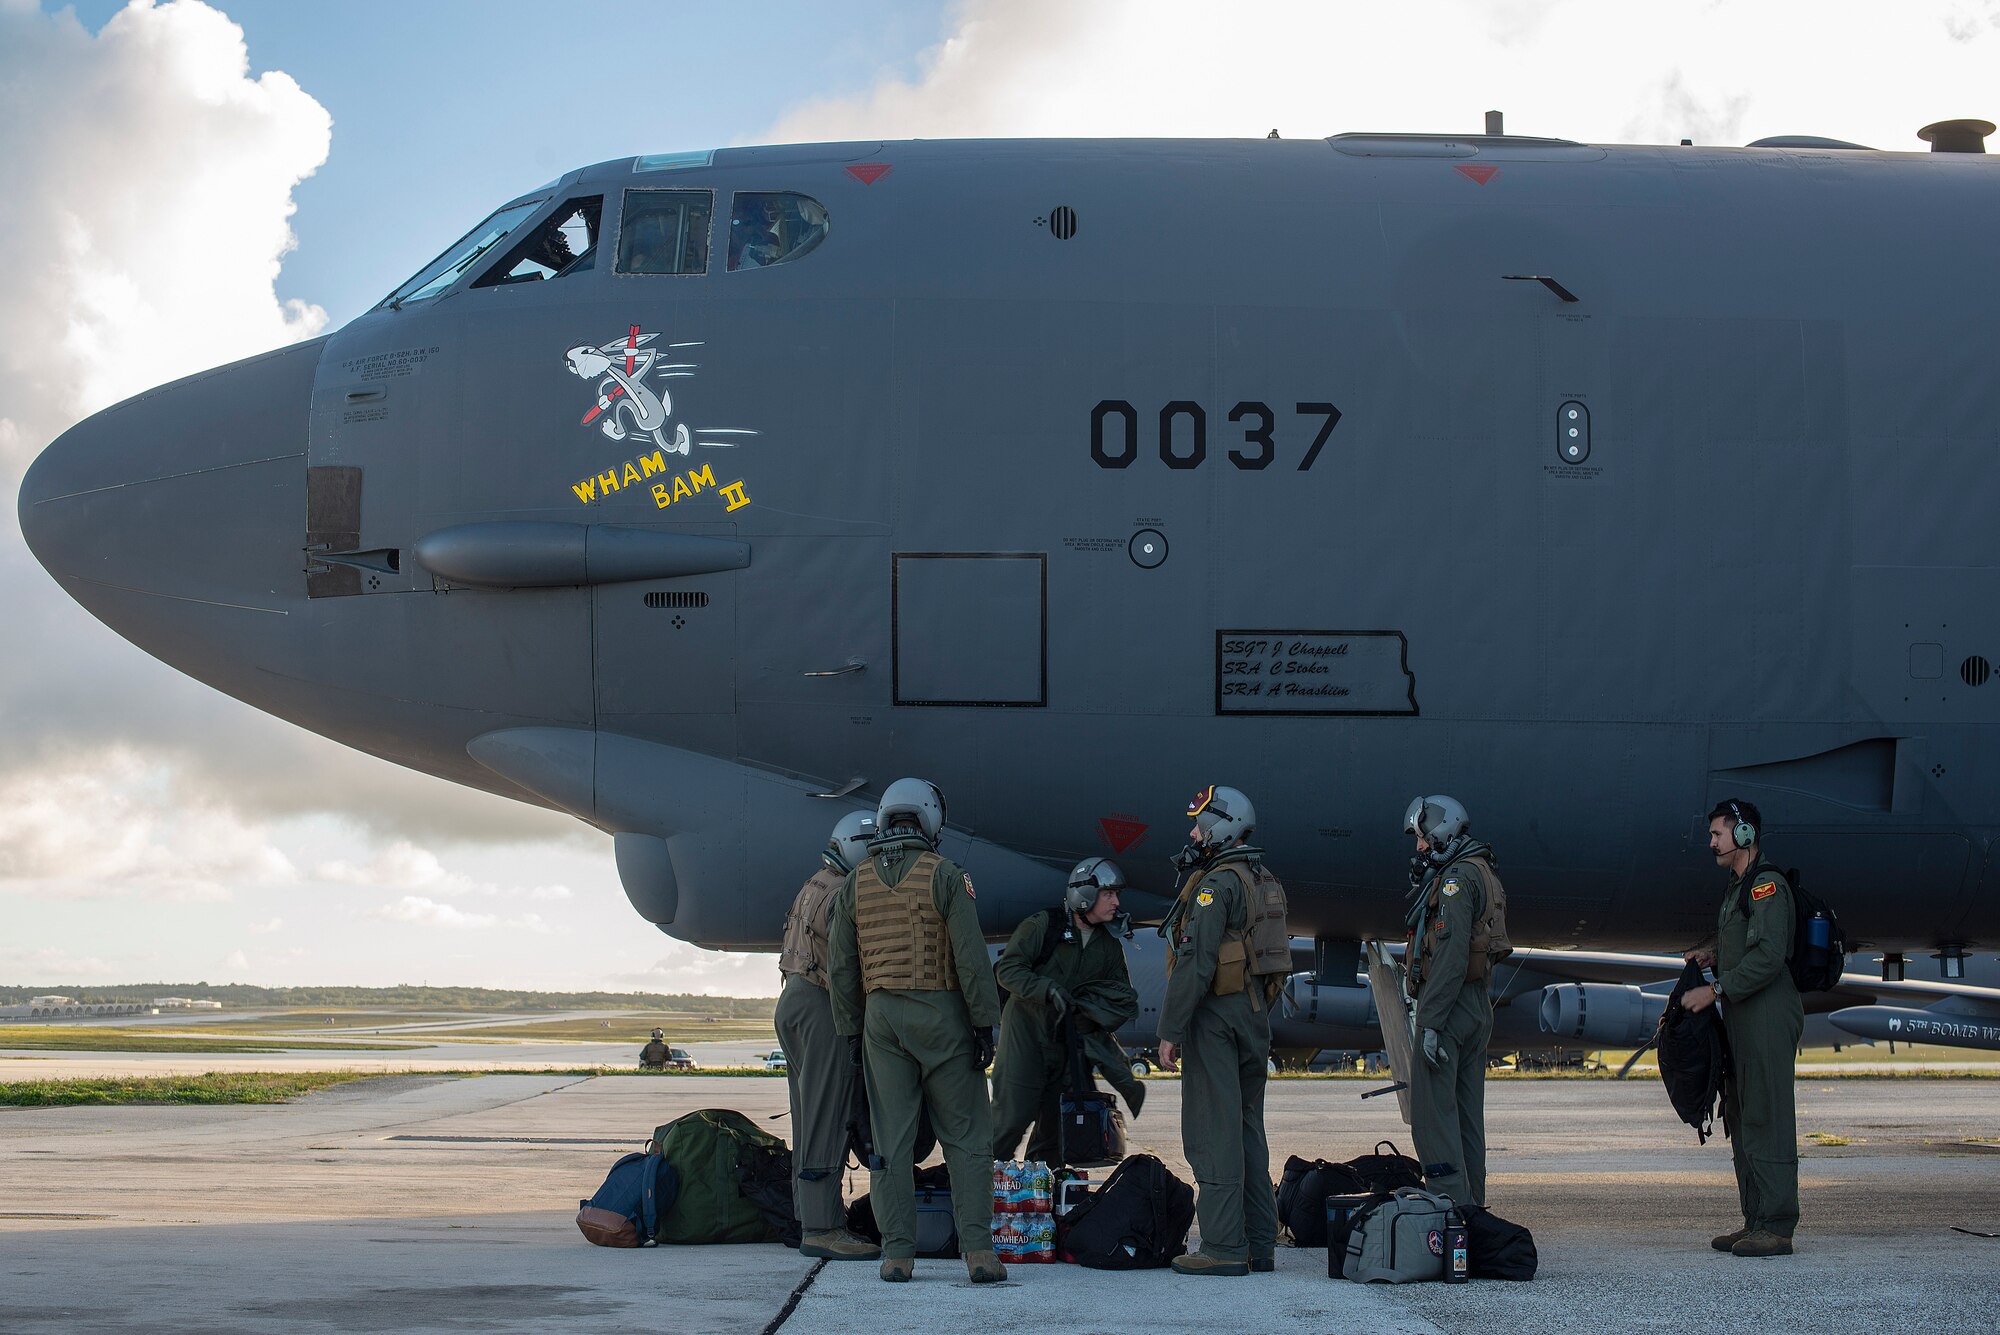 Aircrew from the 23rd Expeditionary Bomb Squadron (EBS) prepare to board a U.S. Air Force B-52H Stratofortress at Andersen Air Force Base, Guam, May 15, 2019. 23rd EBS Airmen and aircraft participated in exercise Northern Edge 2019, a joint training exercise that prepares U.S. military personnel to respond to crises in the Indo-Pacific region. (U.S. Air Force photo by Senior Airman Ryan Brooks)